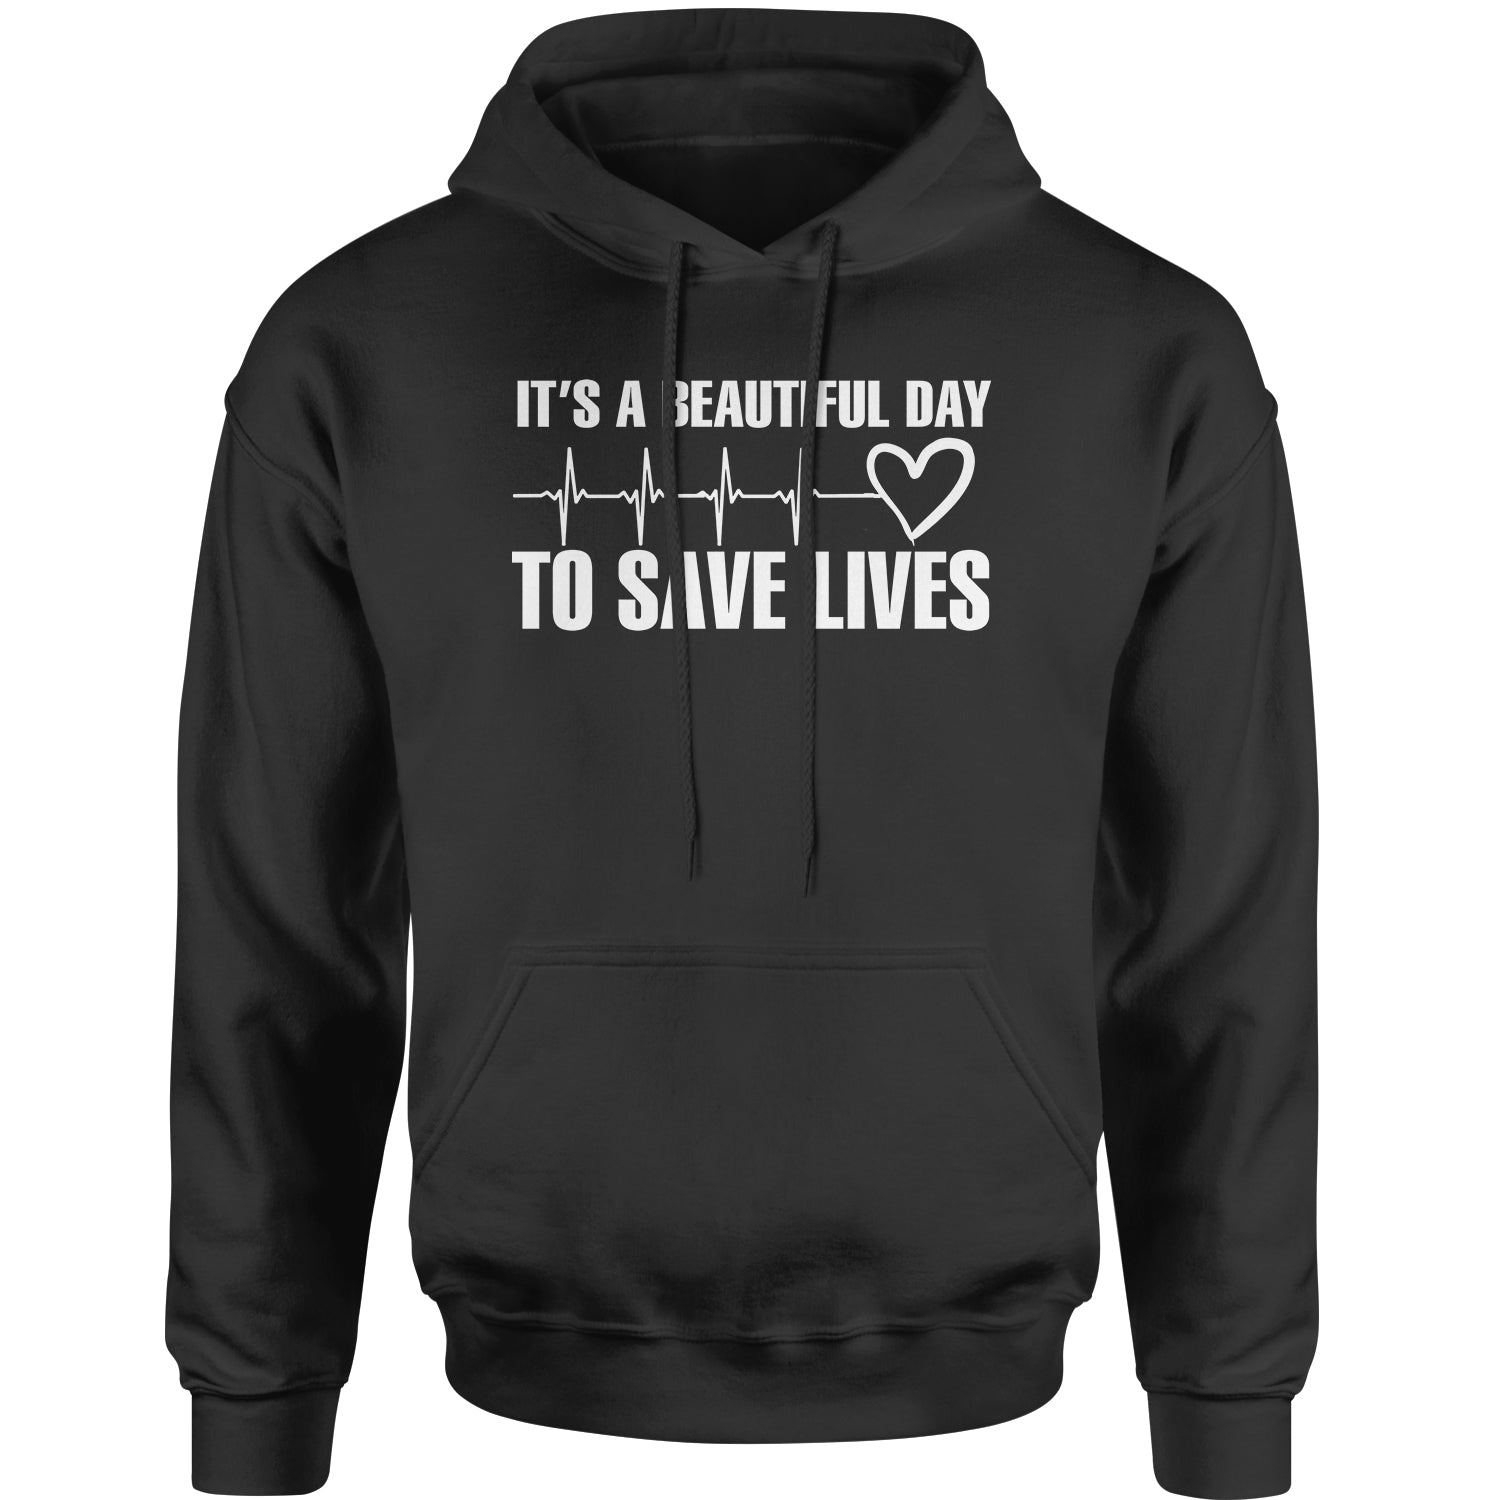 It's A Beautiful Day To Save Lives (White Print) Adult Hoodie Sweatshirt #expressiontees by Expression Tees